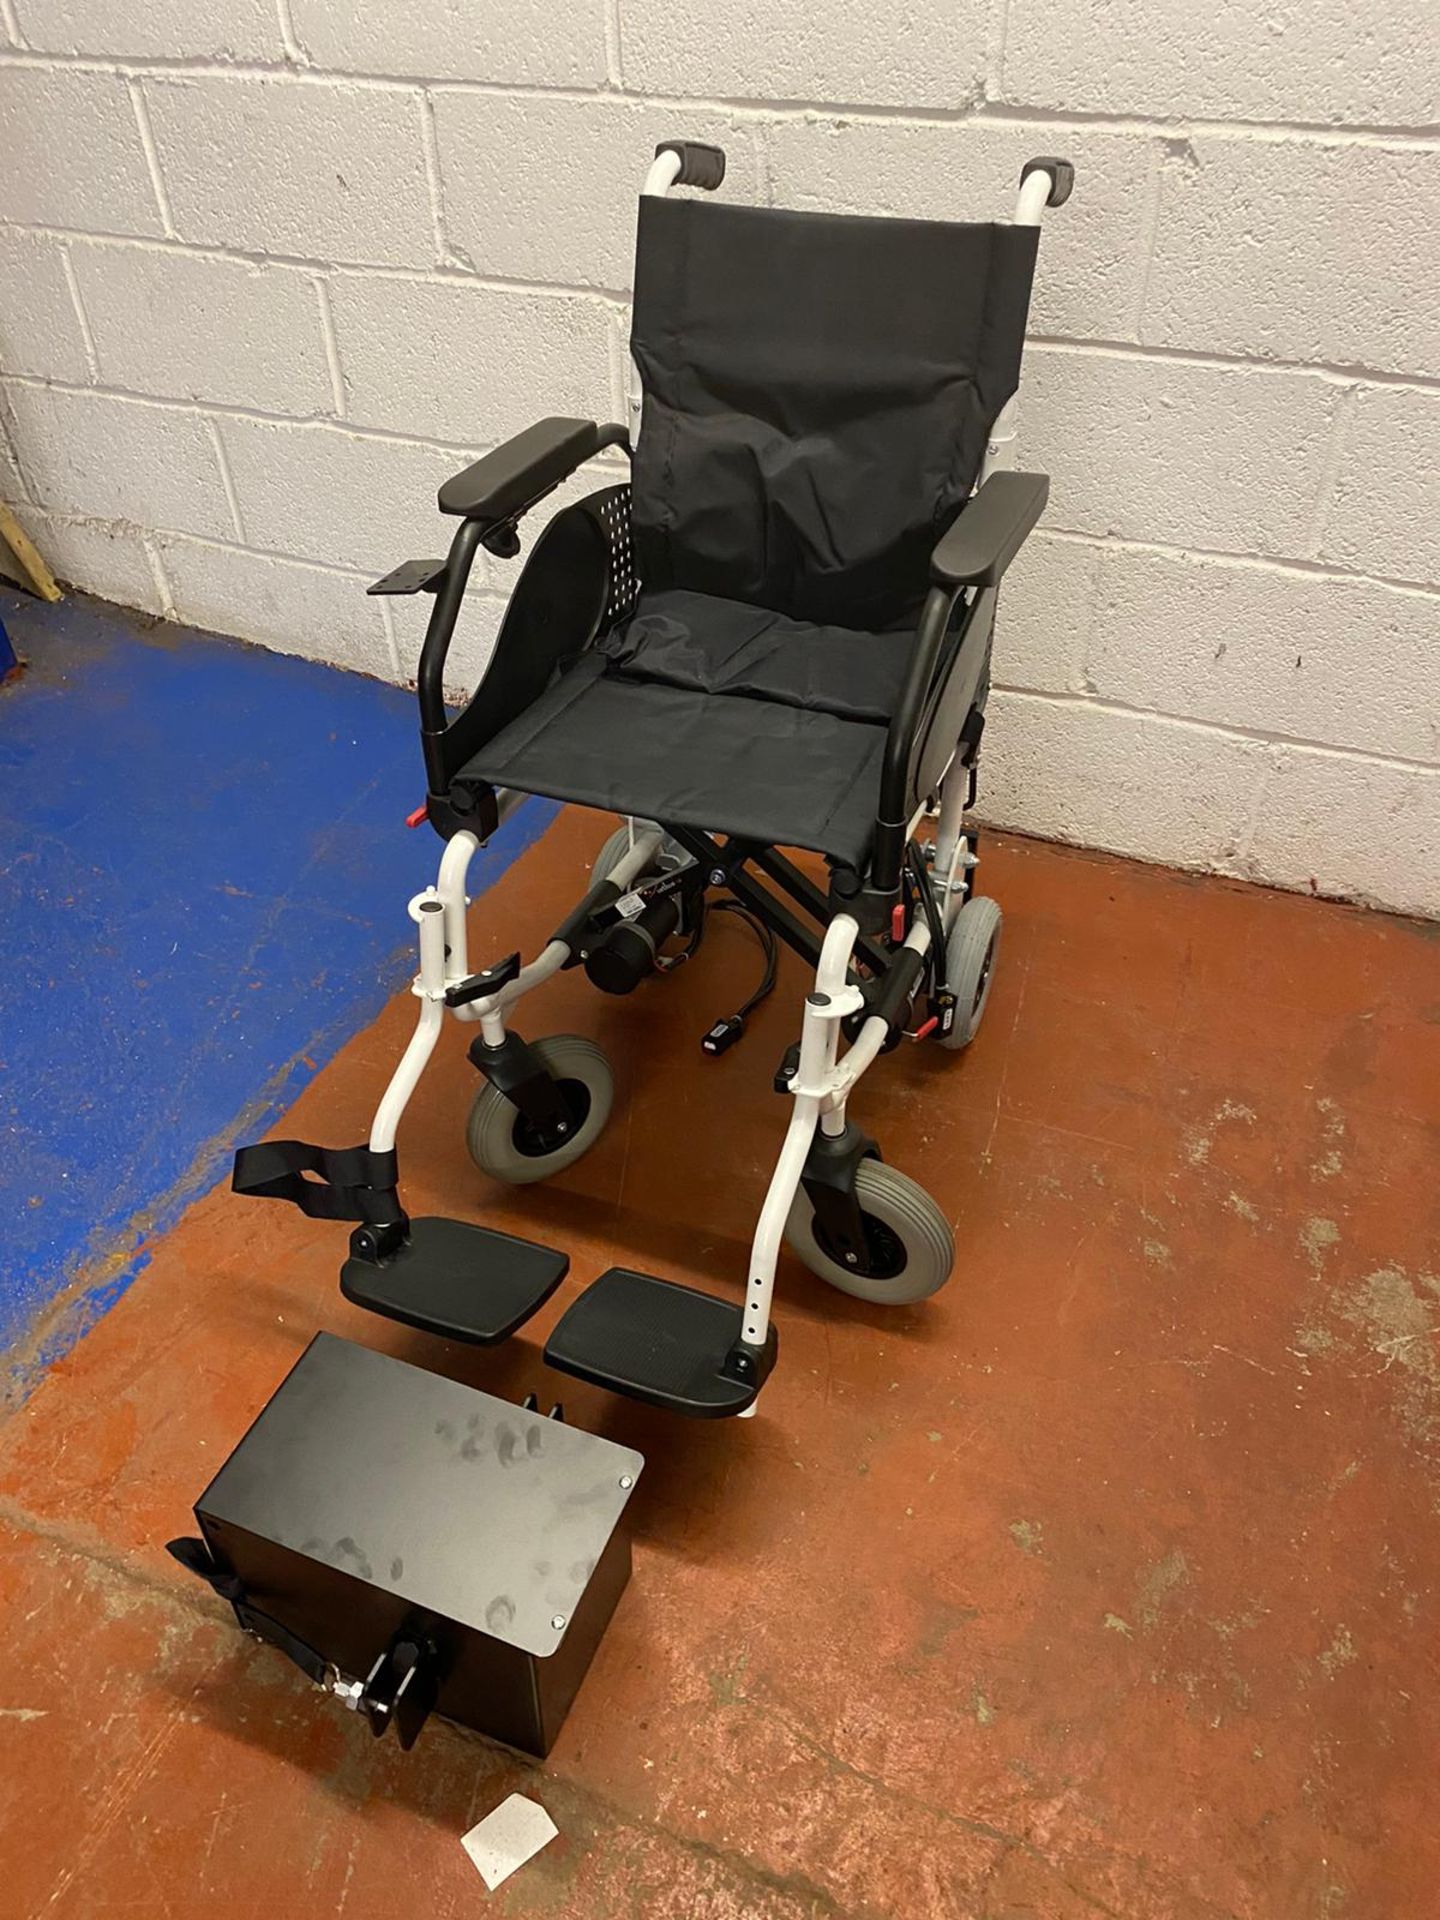 Electric Wheel Chair - No battery - No charger - No control